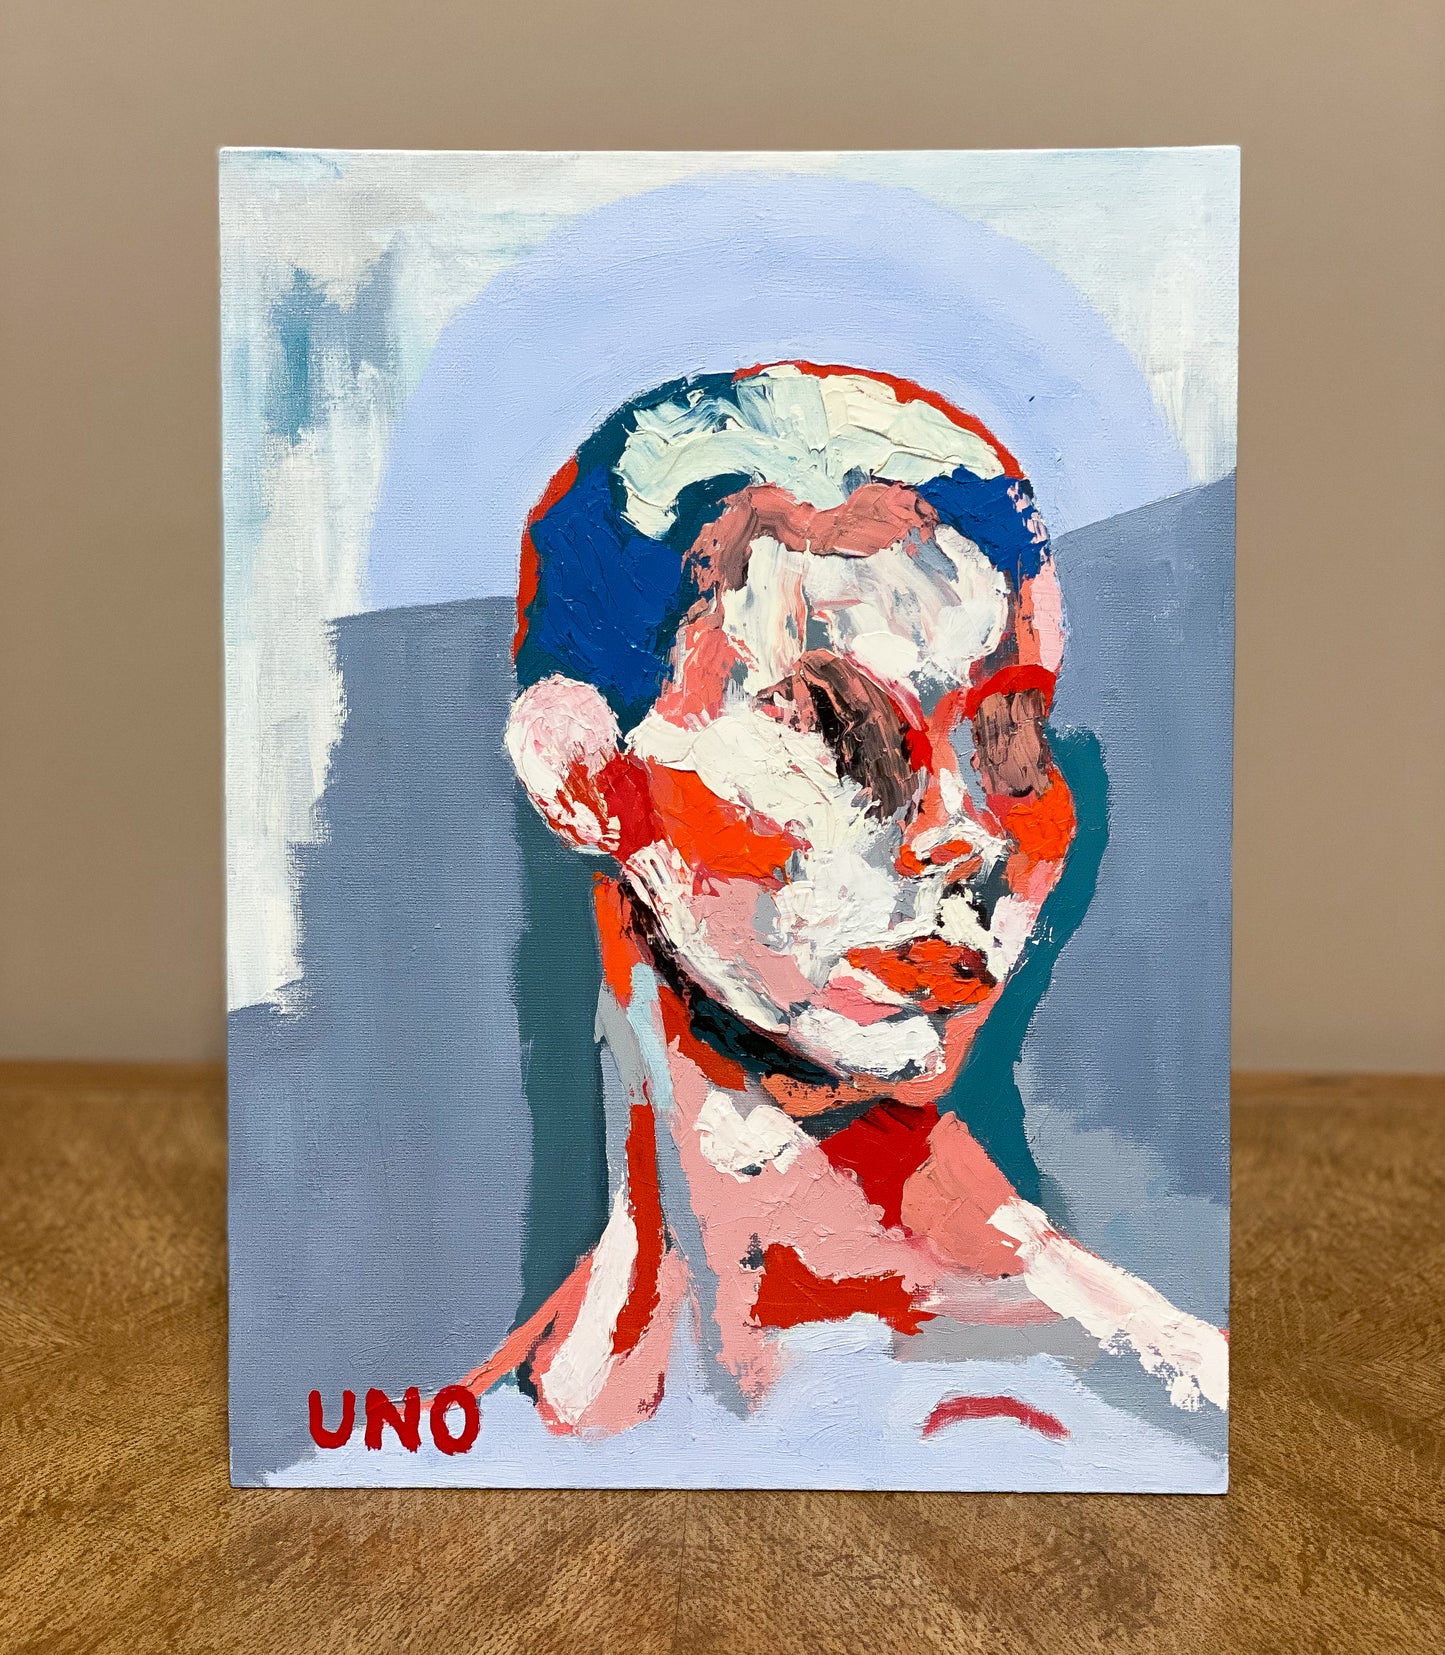 Abstract Portrait Work  by UNO